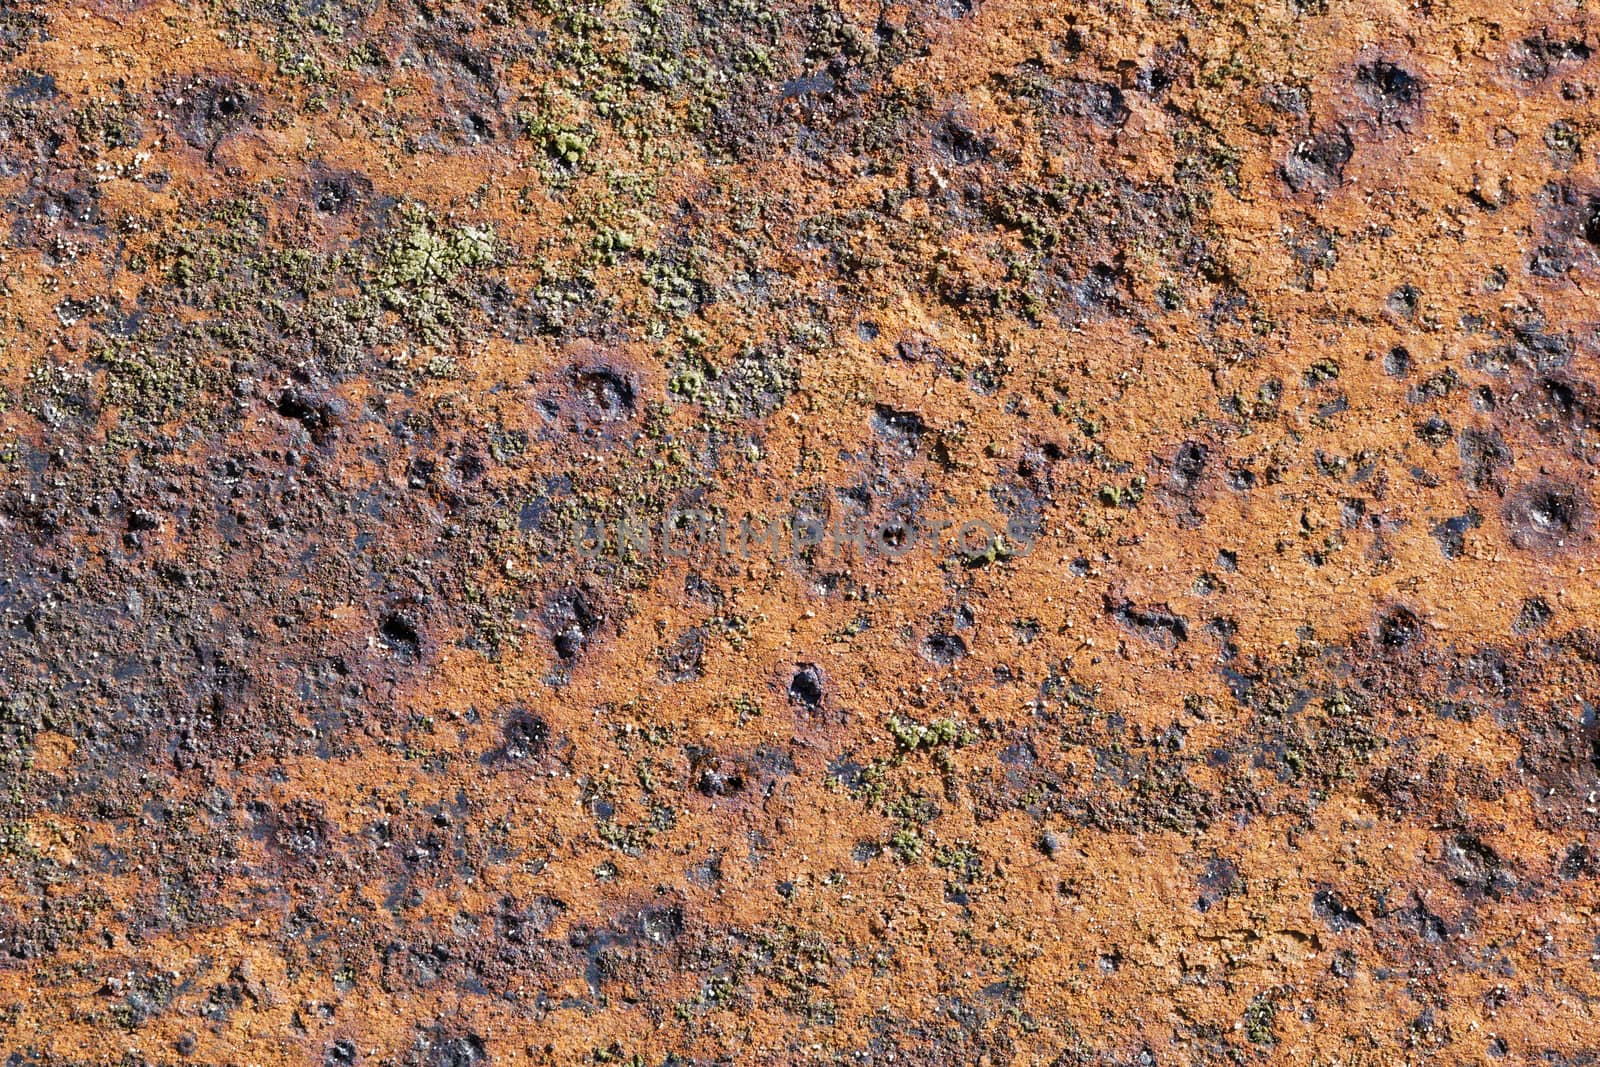 Old metal iron rust texture as a abstract background